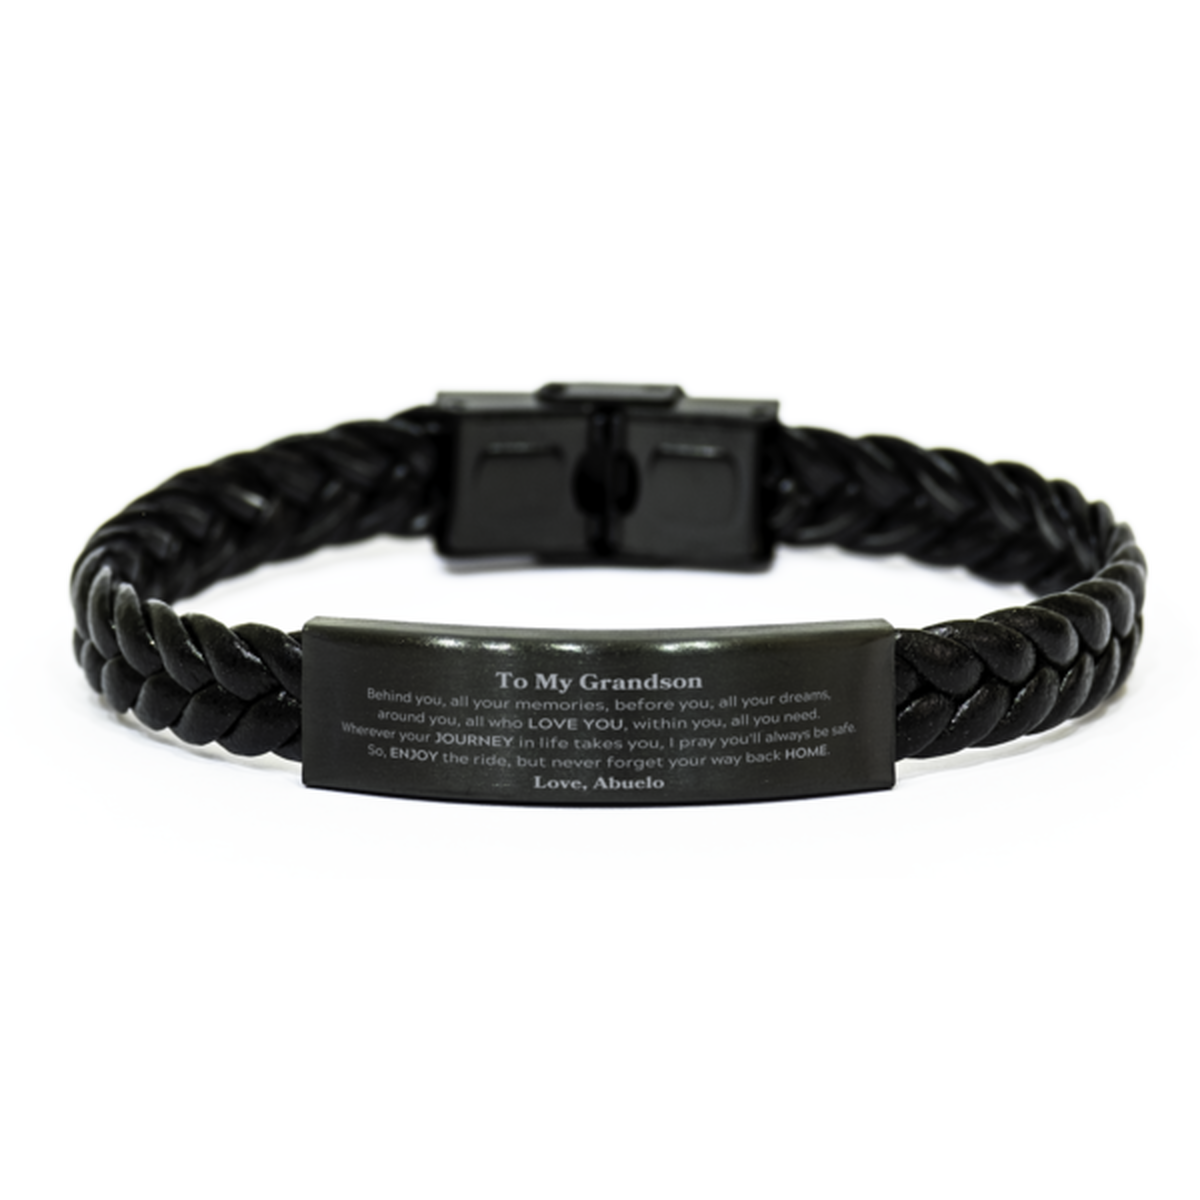 To My Grandson Graduation Gifts from Abuelo, Grandson Braided Leather Bracelet Christmas Birthday Gifts for Grandson Behind you, all your memories, before you, all your dreams. Love, Abuelo